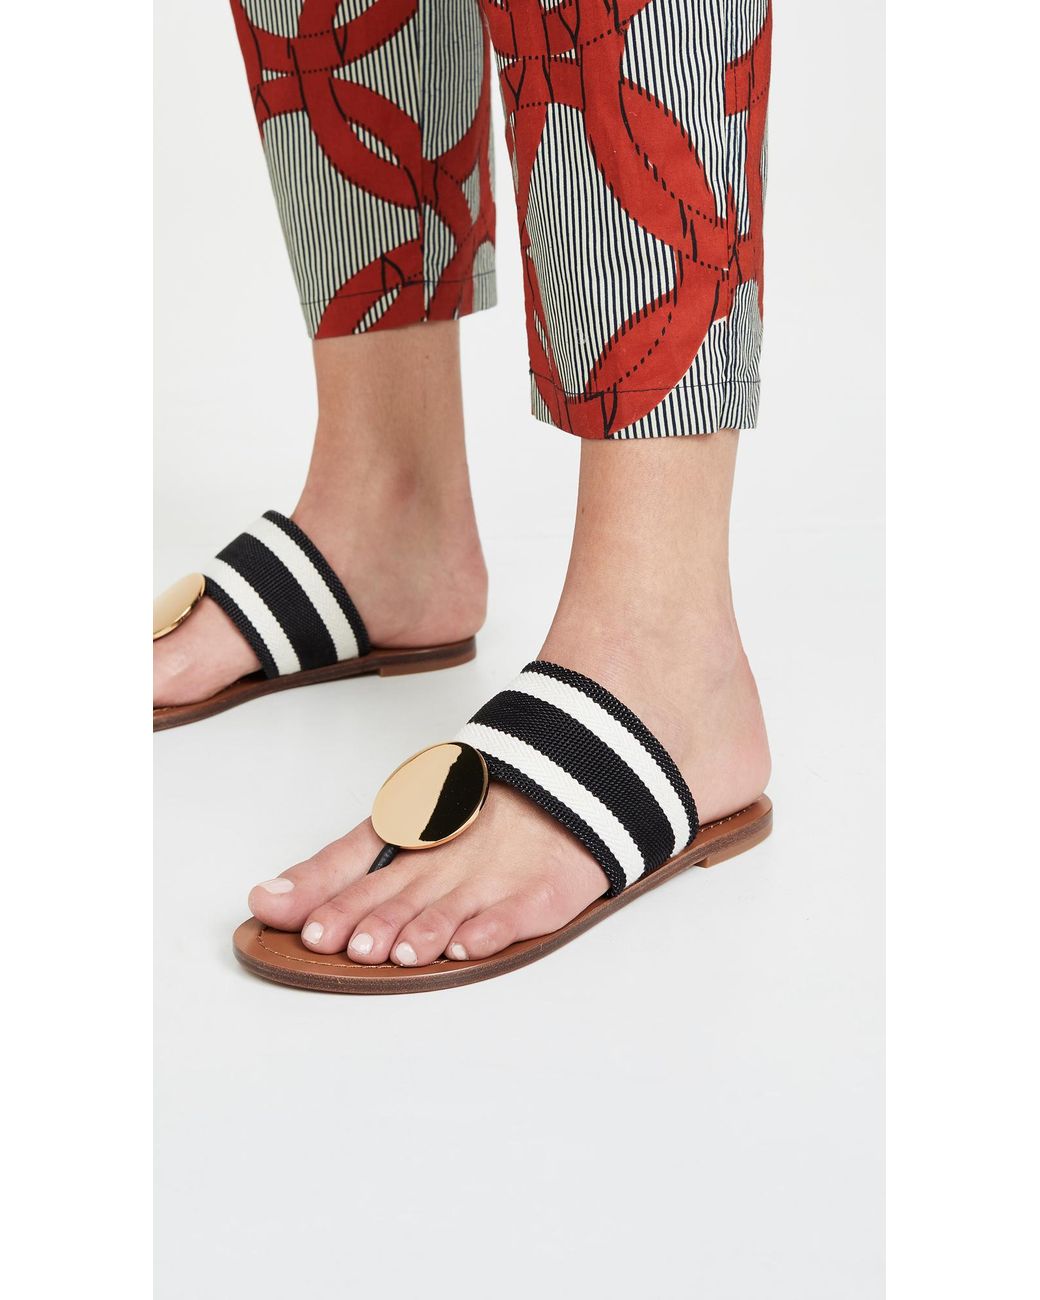 Tory Burch Patos Disk Sandals in Black | Lyst